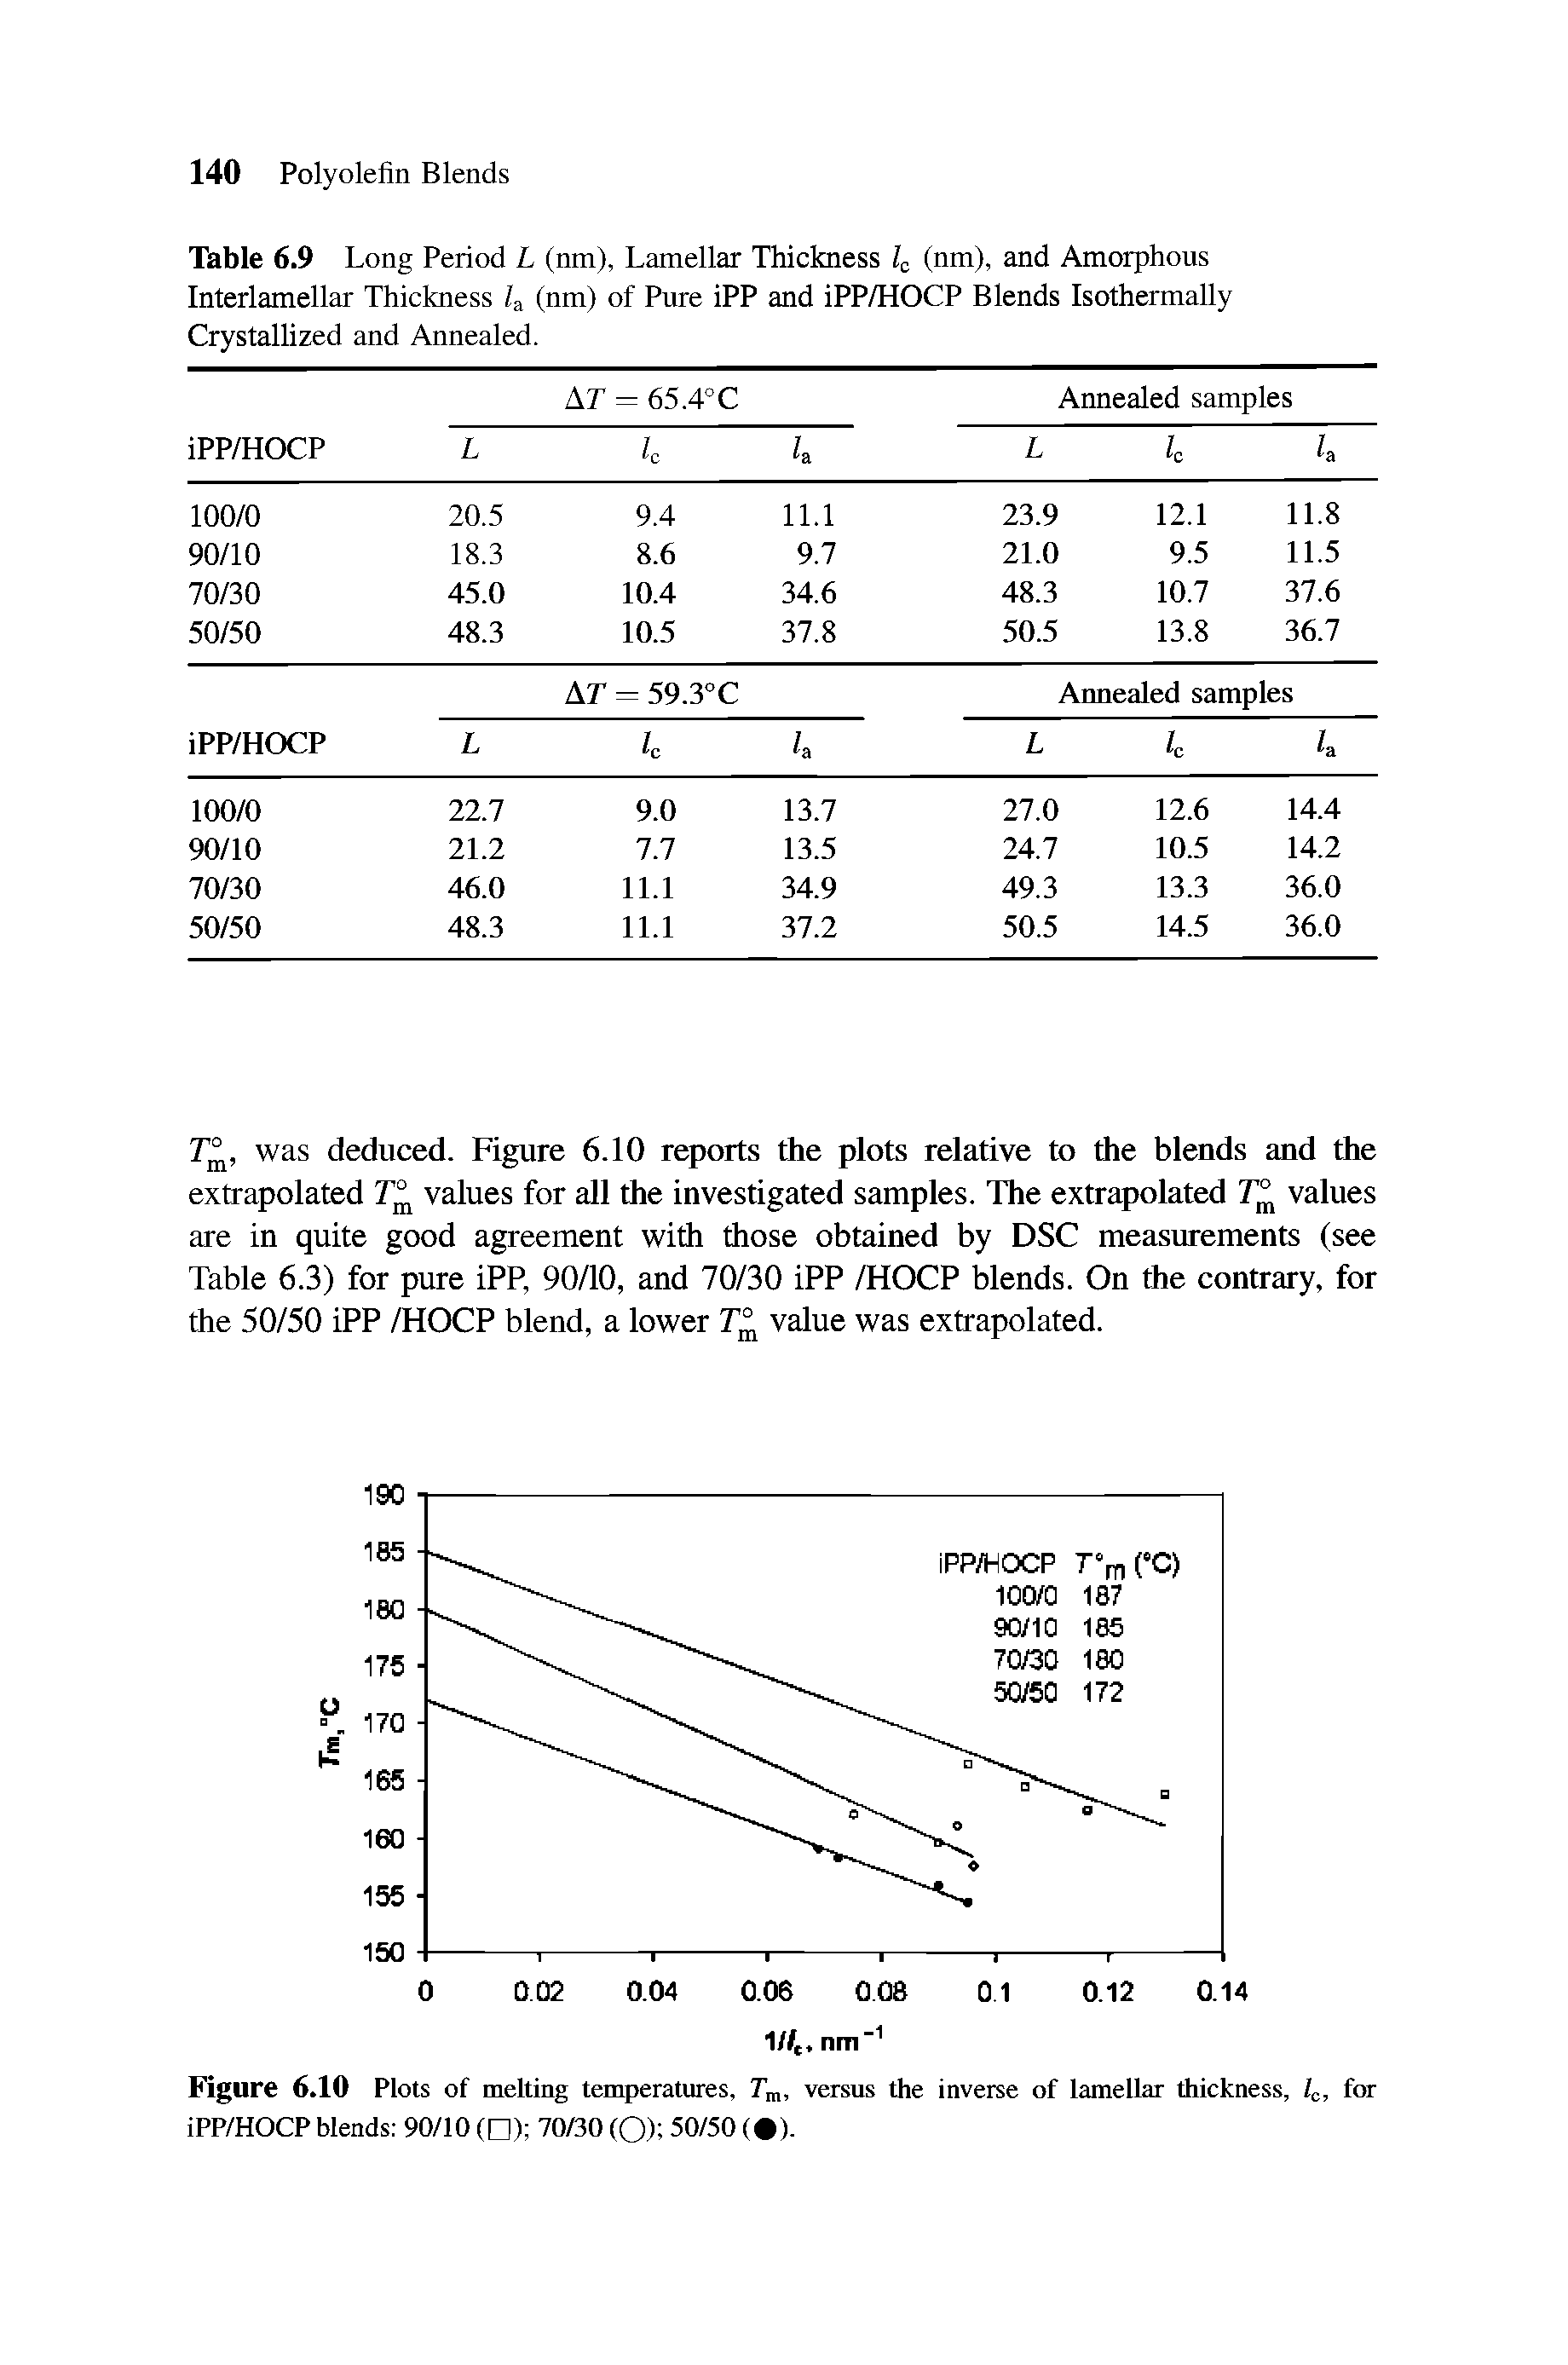 Table 6.9 Long Period L (nm), Lamellar Thickness 1 (nm), and Amorphous Interlamellar Thickness /a (nm) of Pure iPP and iPP/HOCP Blends Isothermally Crystallized and Annealed.